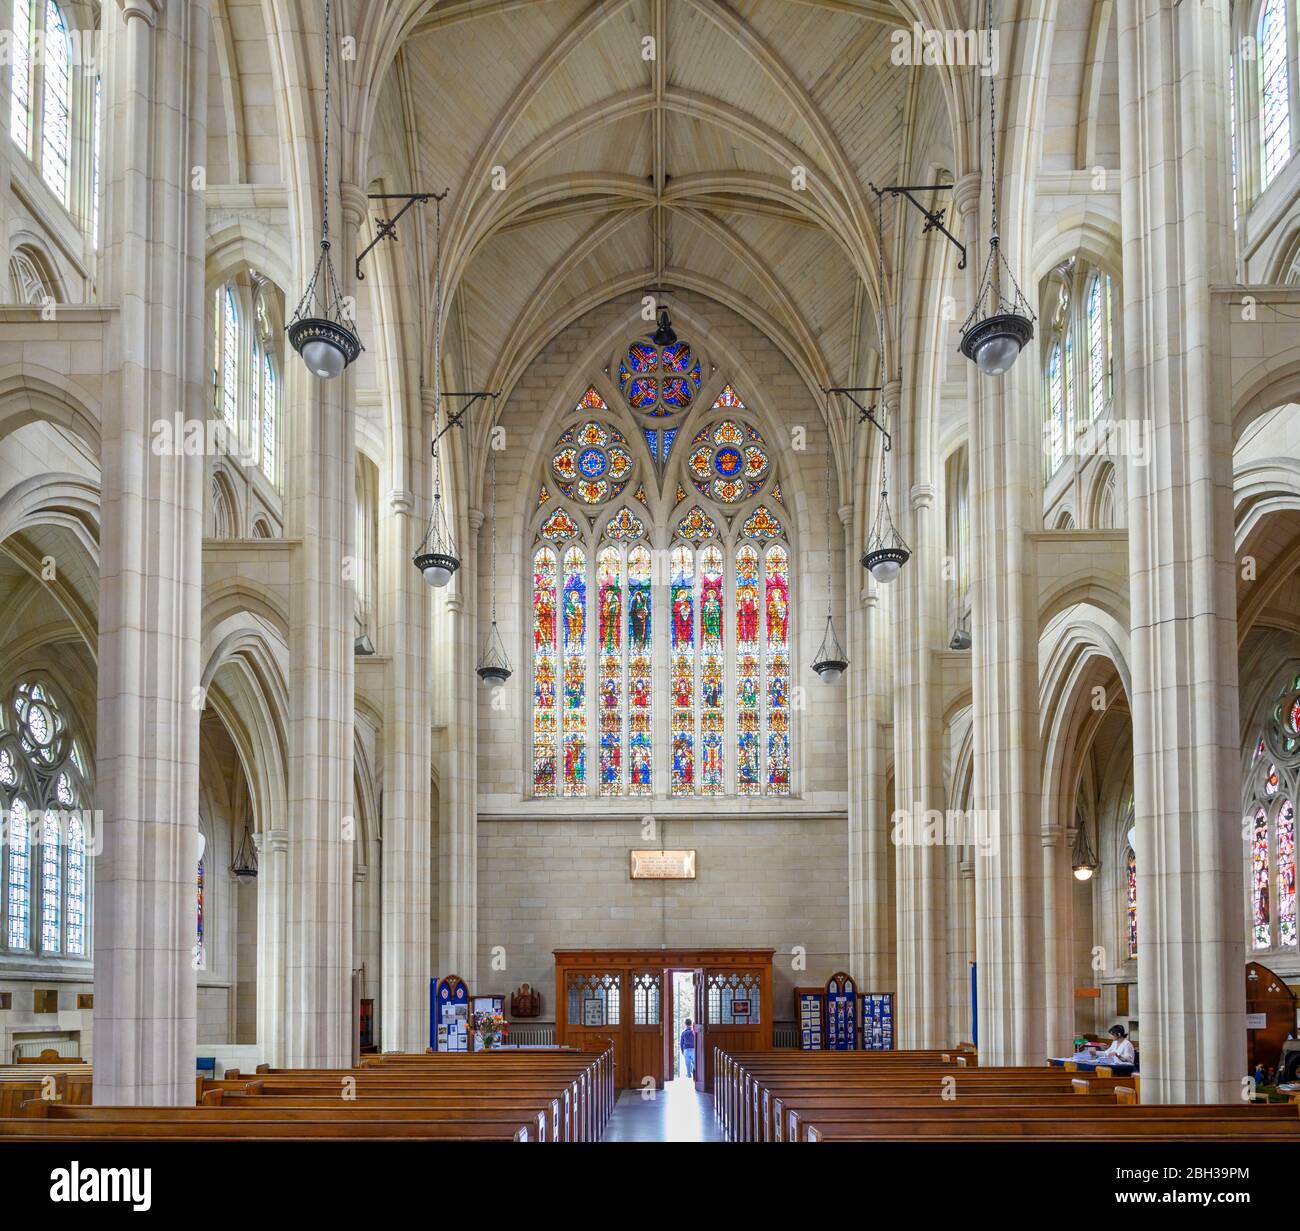 Interior of St Paul's Cathedral, Dunedin, New Zealand Stock Photo